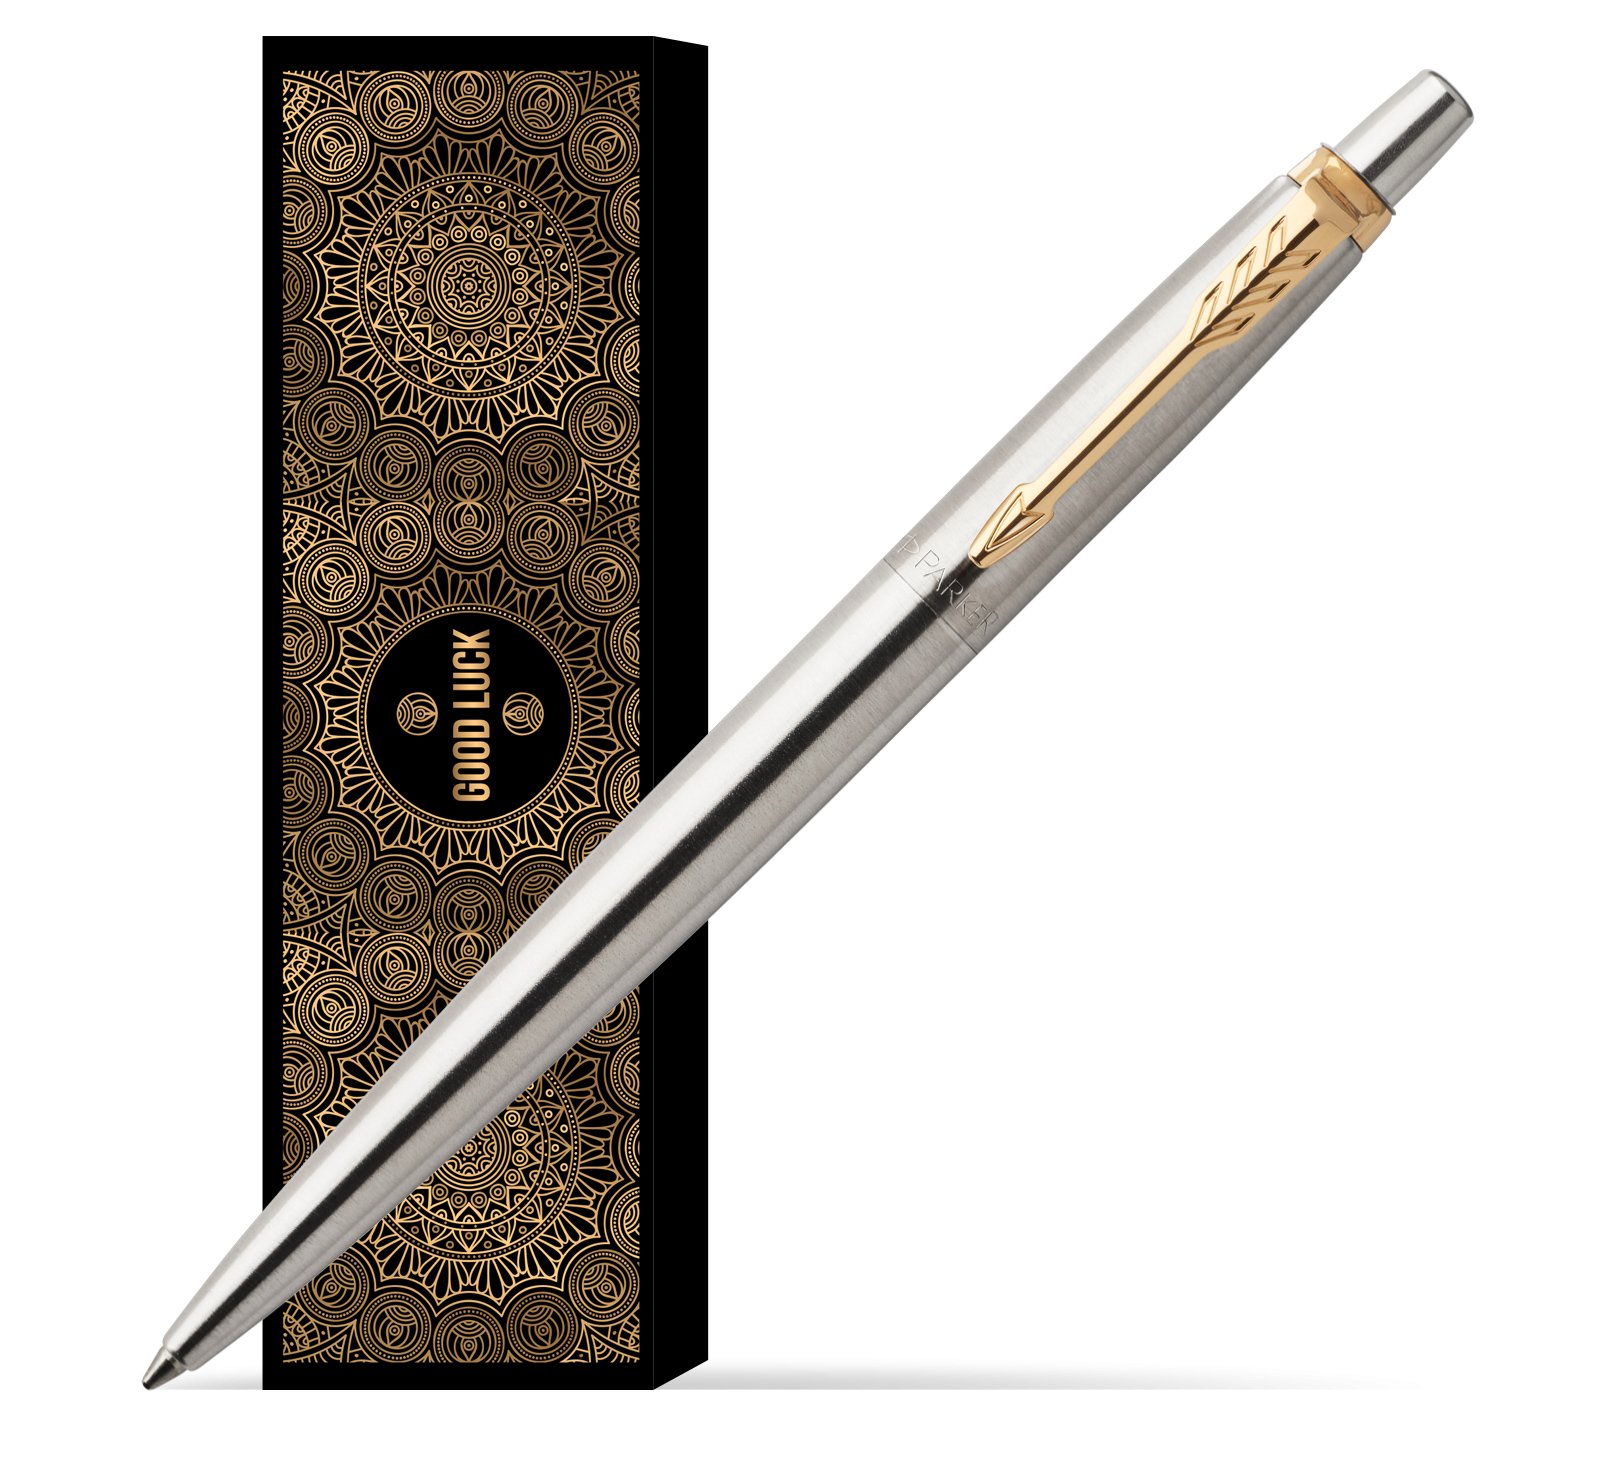 Parker Classic Stainless Steel Gold Trim Ball Pen and Mechanical Pencil Set